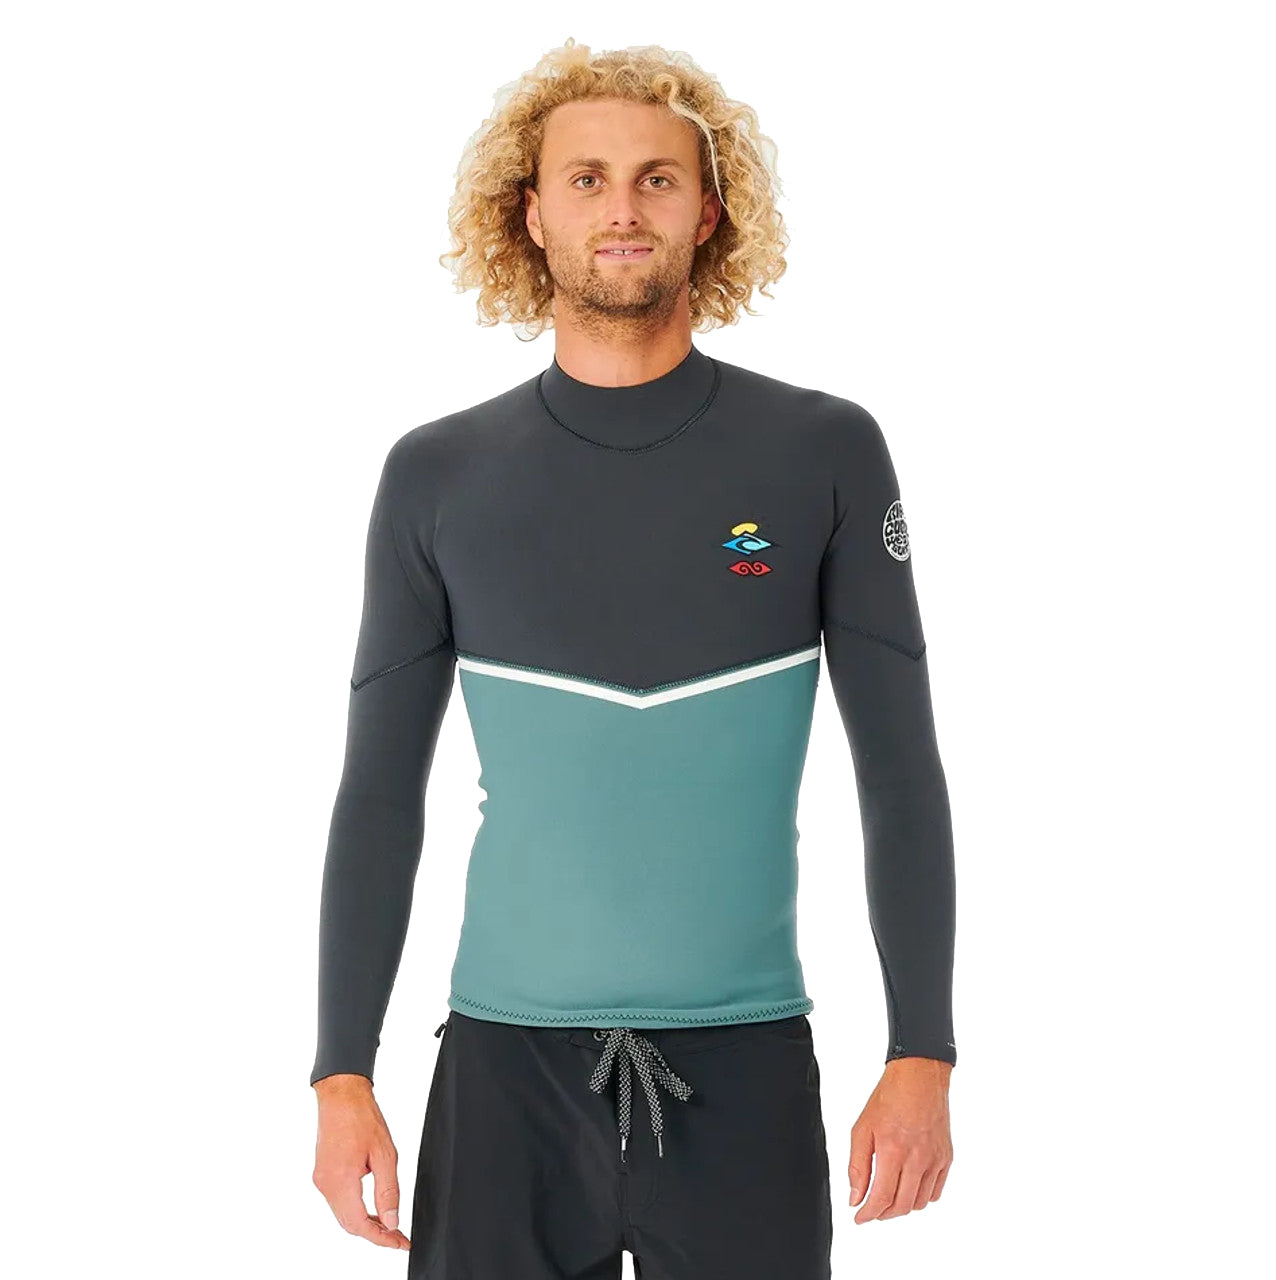 Rip Curl E-Bomb Search 1.5mm LS GB Wetsuit Jacket 8088-Muted Green L